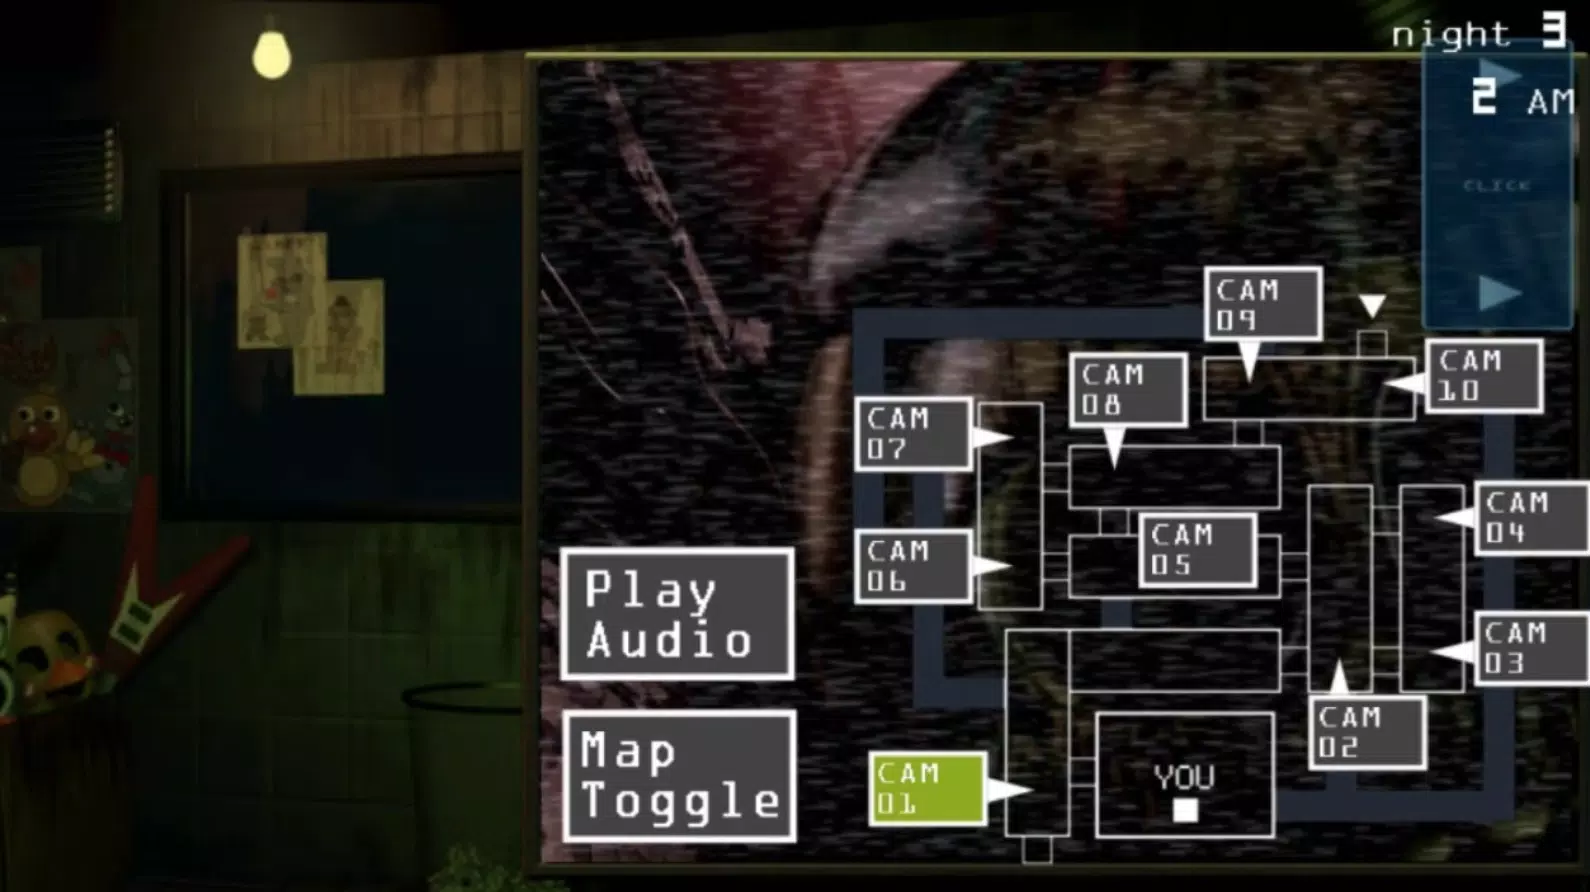 Five Nights at Freddy's APK Download for Android Free